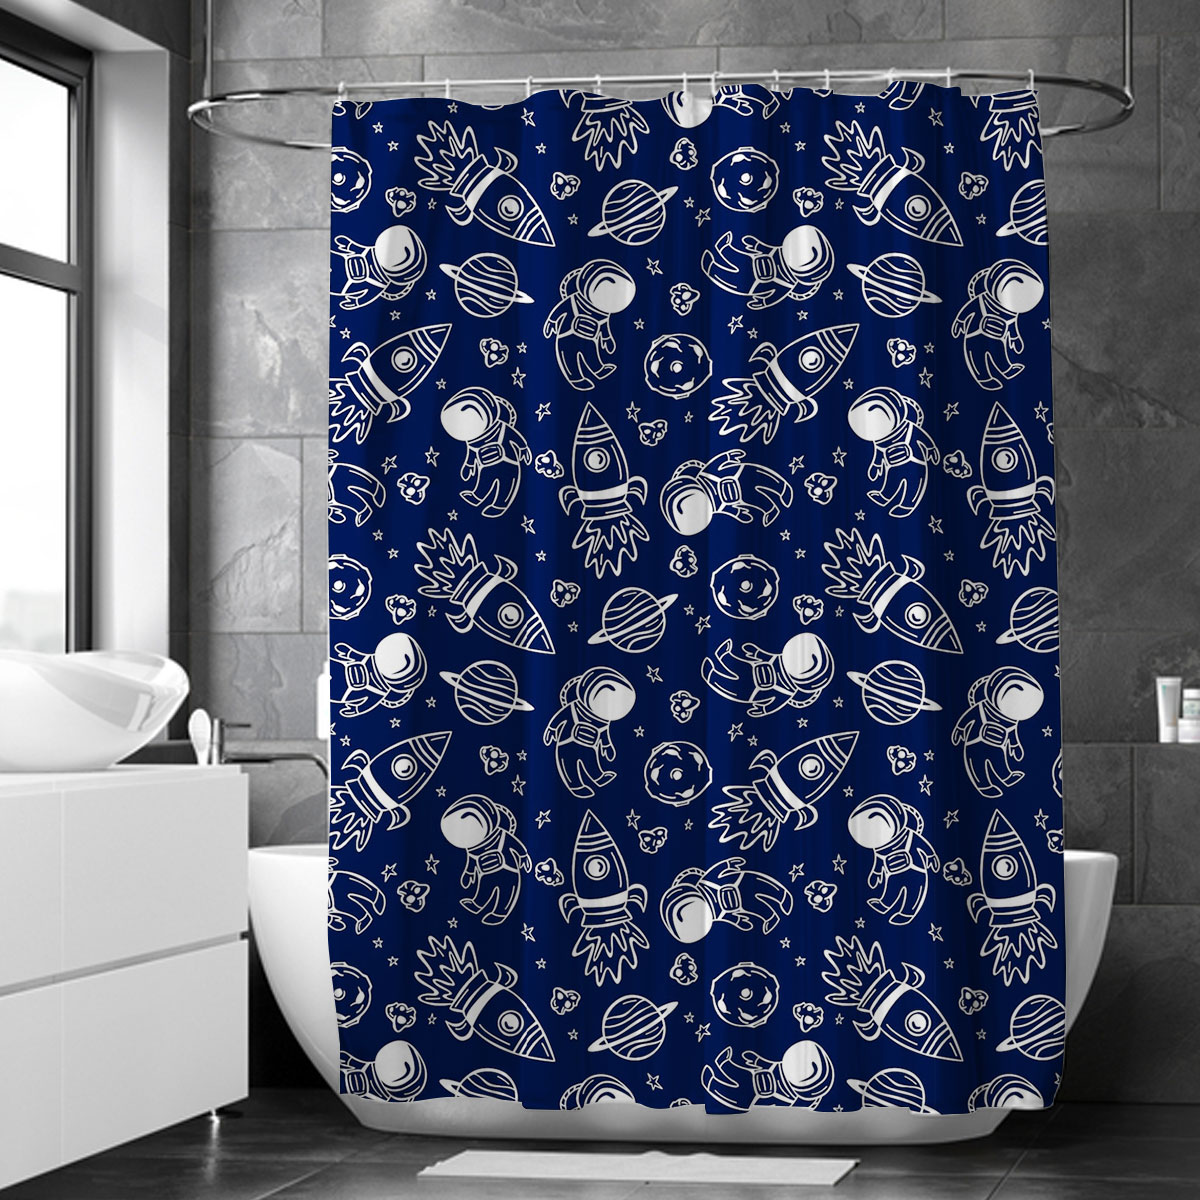 Astronaut in Doodle Style Shower Curtain